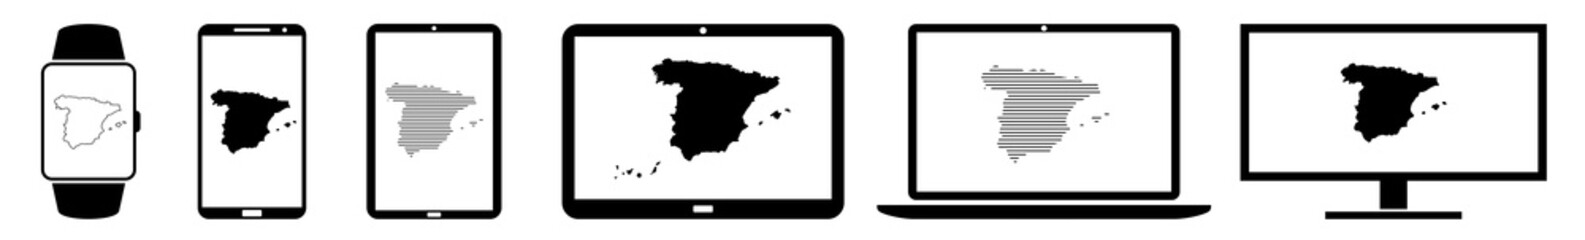 Display Spain, map, border, country, geography Icon Devices Set | Web Screen Device Online | Laptop Vector Illustration | Mobile Phone | PC Computer Smartphone Tablet Sign Isolated